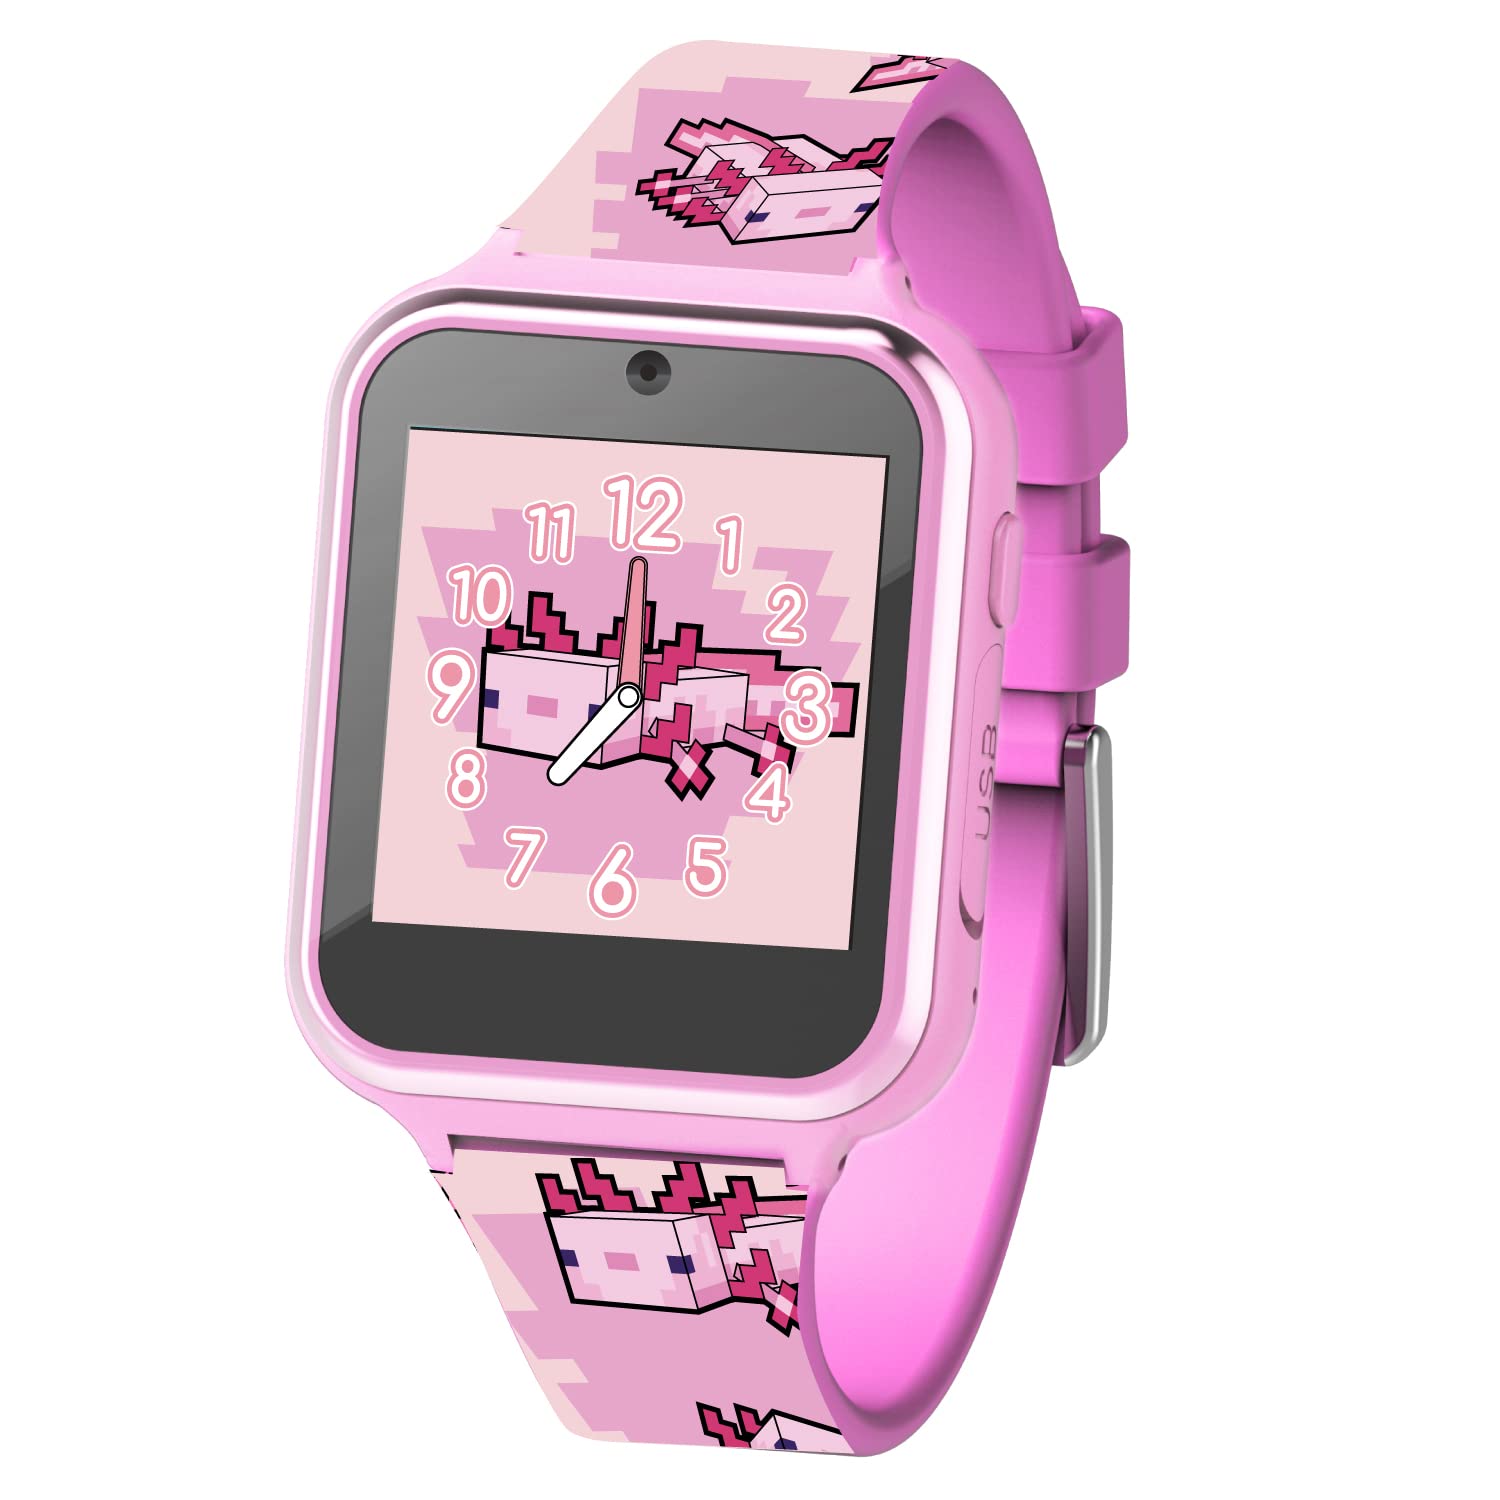 Accutime Minecraft Kids Pink Educational Learning Touchscreen Smart Watch Toy for Girls, Boys, Toddlers - Selfie Cam, Learning Games, Alarm, Calculator, Pedometer & More (Model: MIN4160AZ)